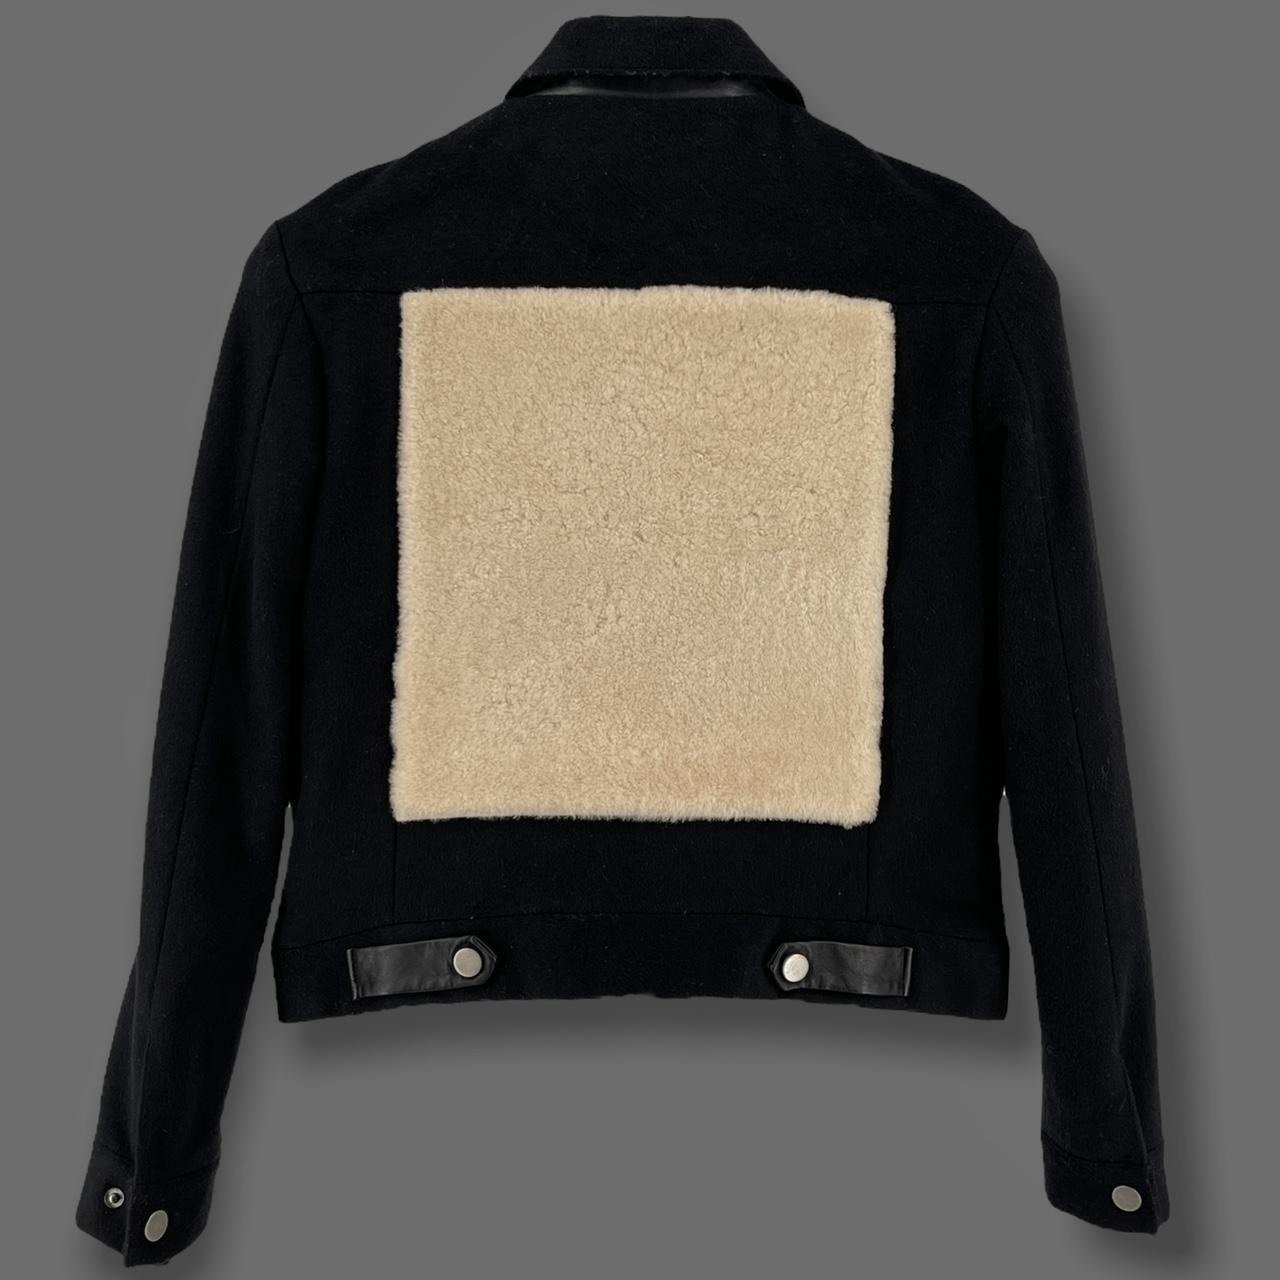 Product Image 1 - This black and cream jacket